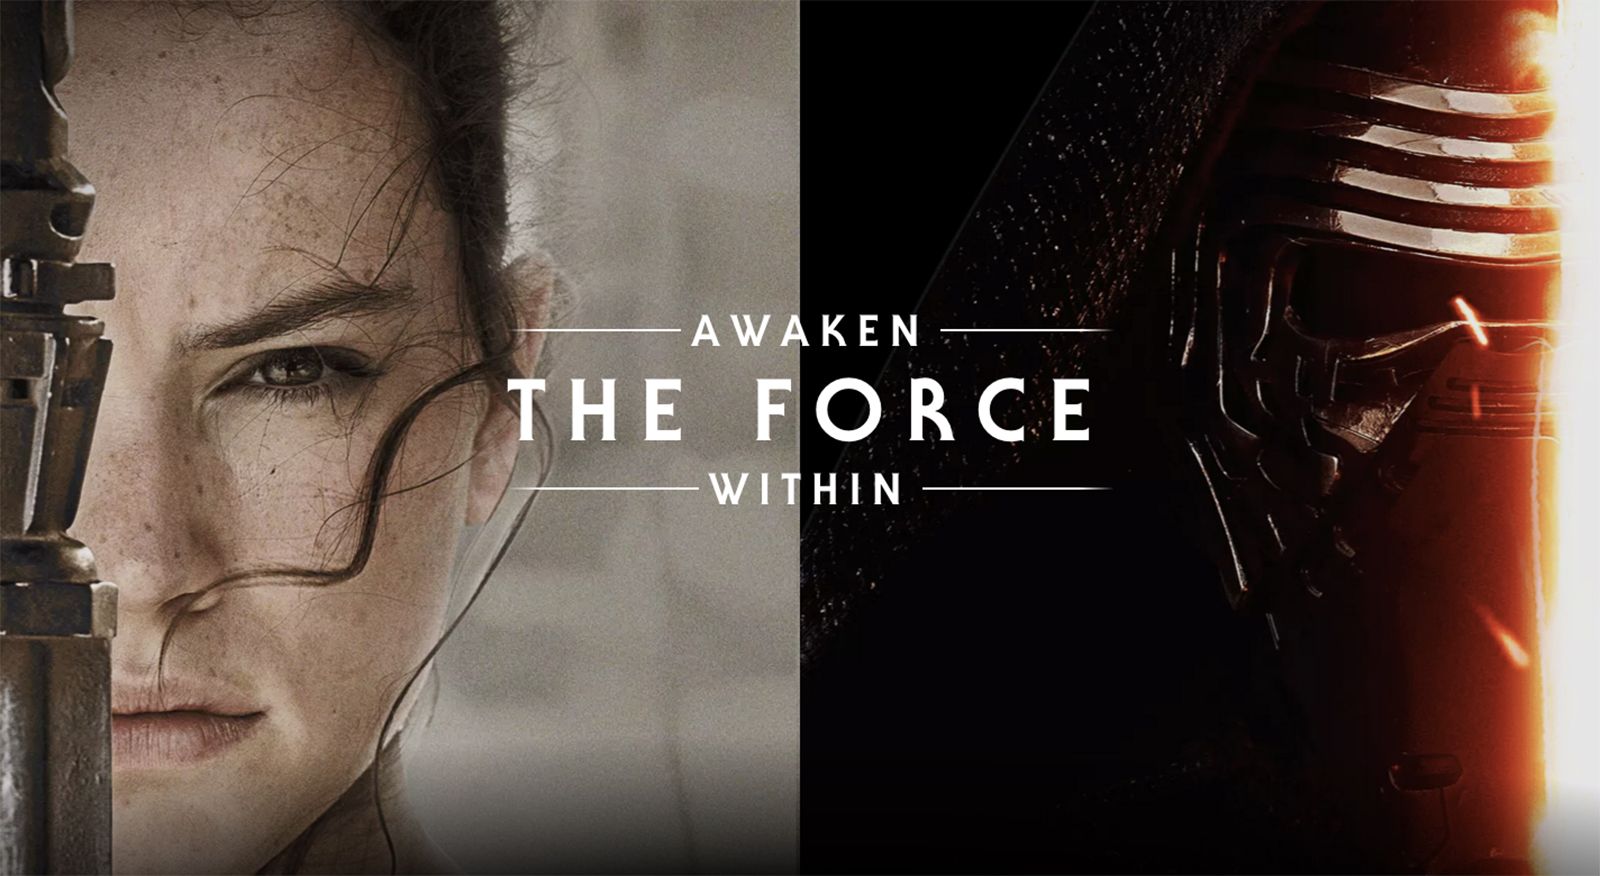 google goes star wars mad pick a dark or light side of the force to try image 1